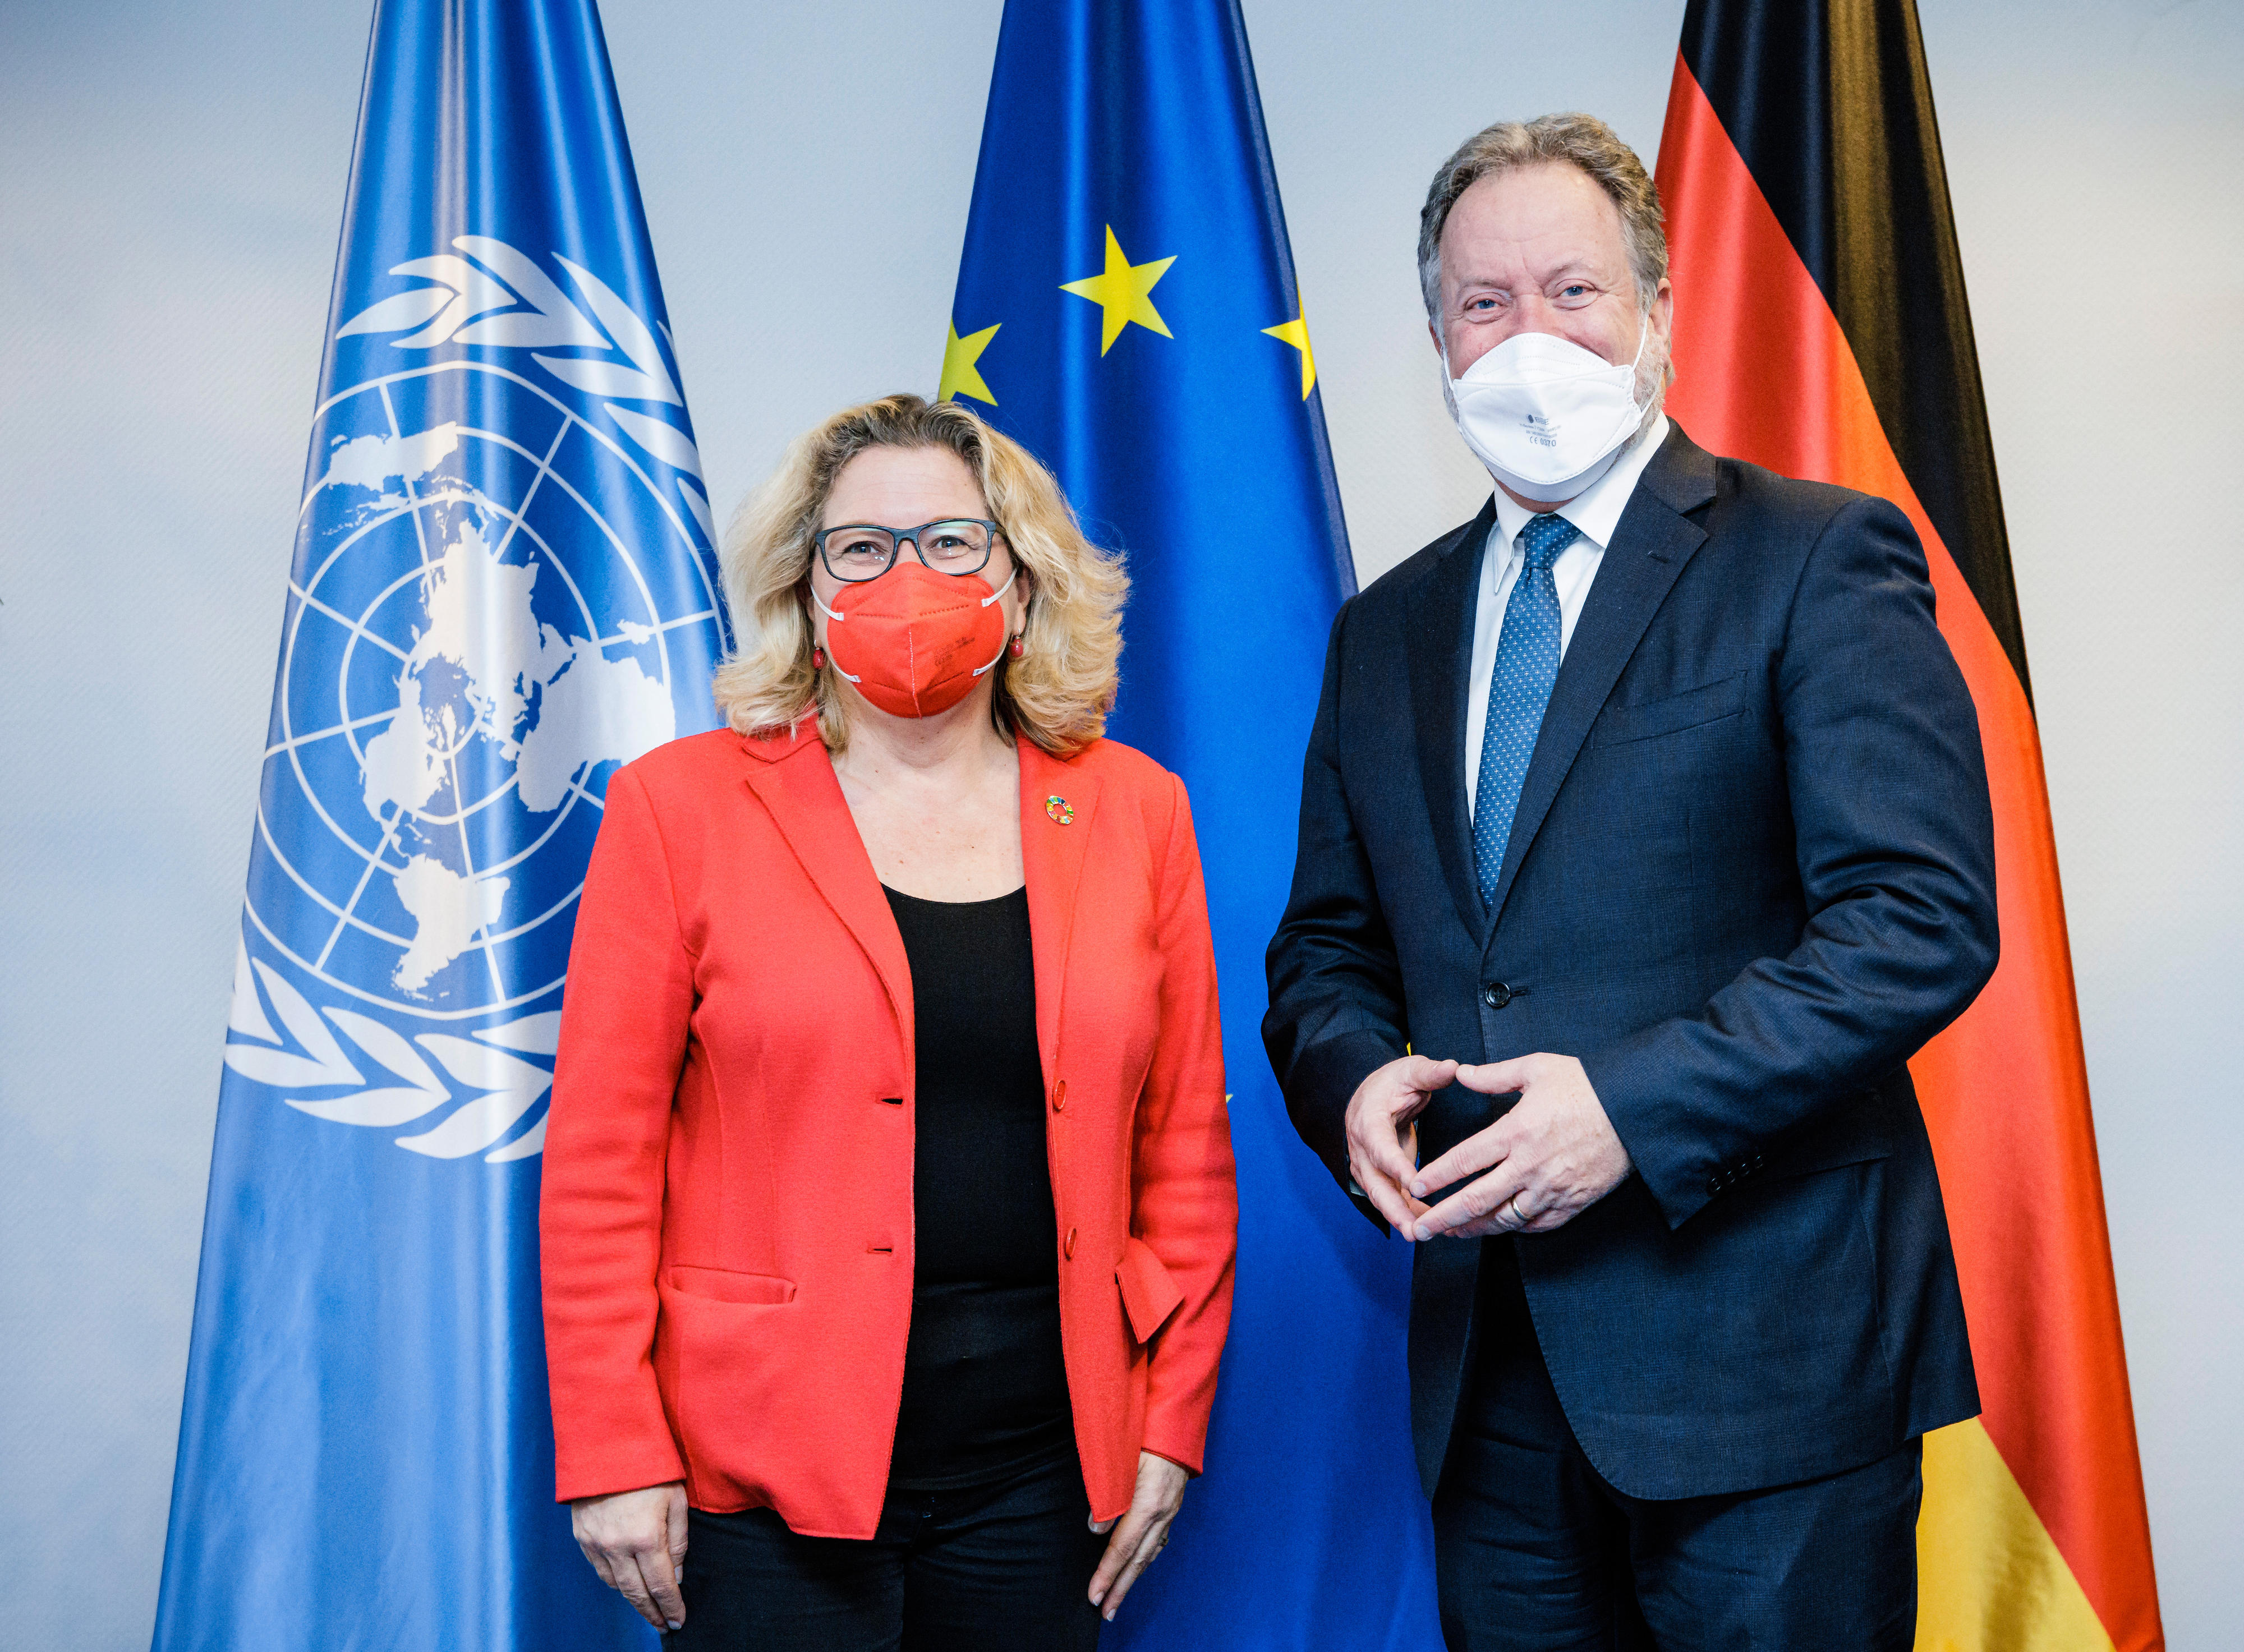 Federal Development Minister Svenja Schulze at her meeting with David Beasley, Executive Director of the UN World Food Programme (WFP)